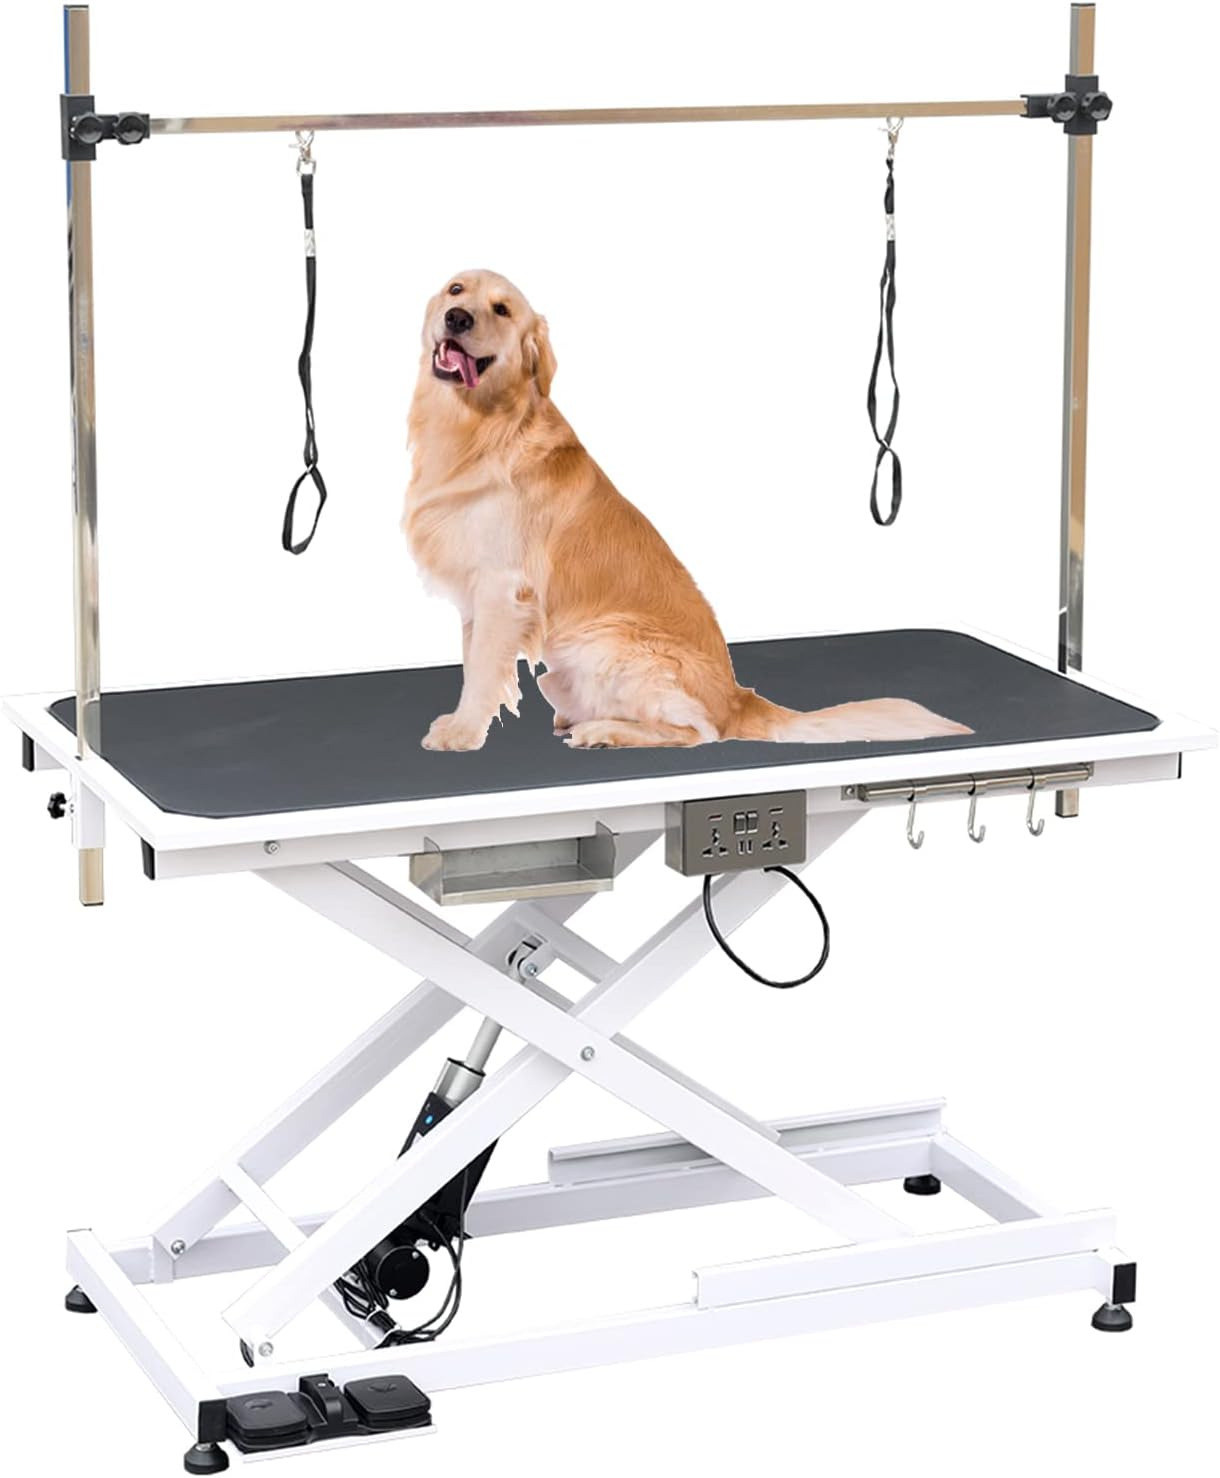 Electric Lift Pet Grooming Table, Heavy Duty Professional X-Type Electric Dog Gr